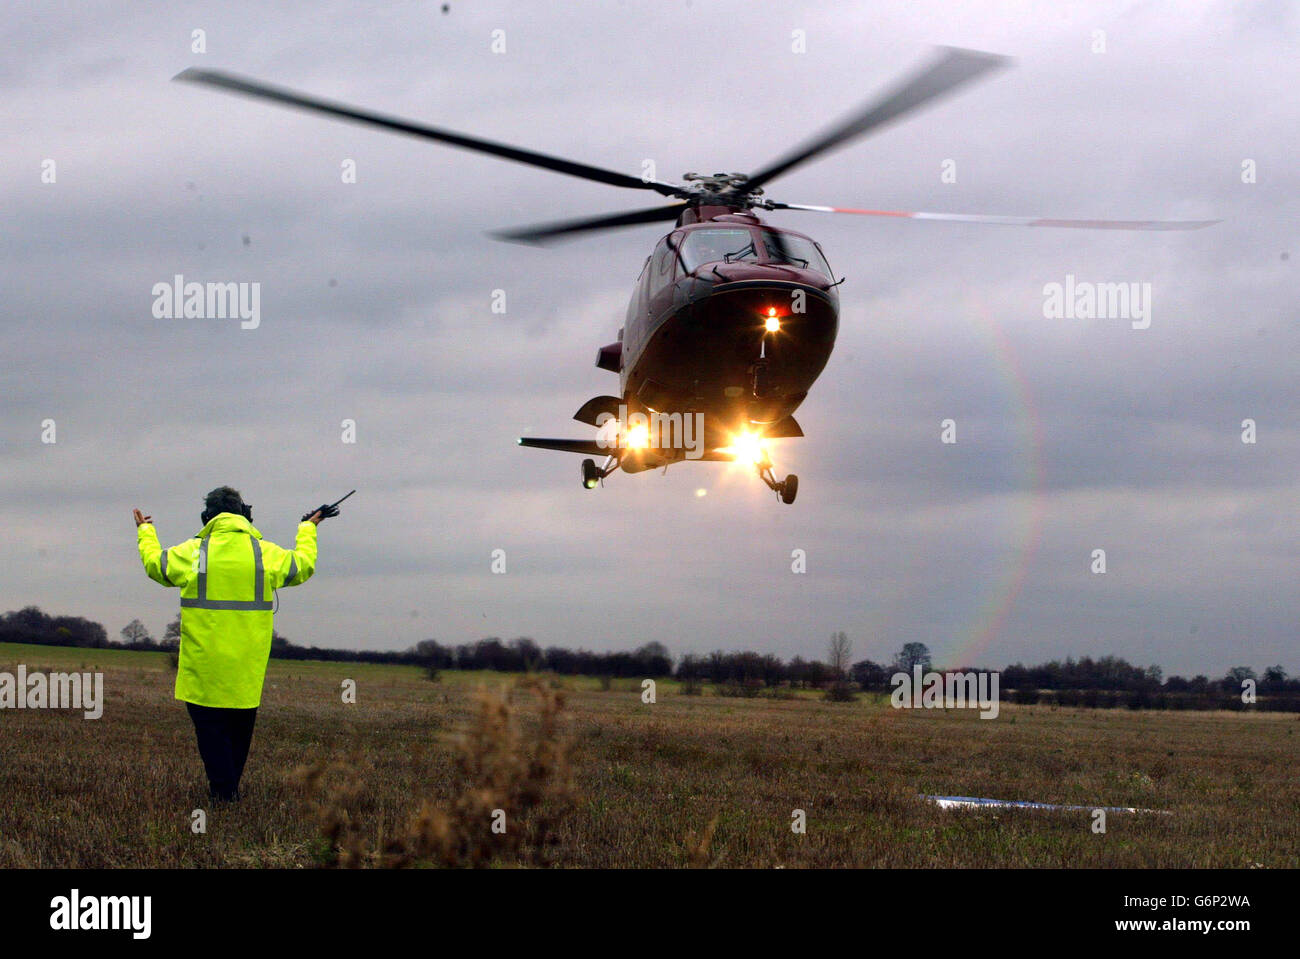 hrh-the-prince-of-wales-arriving-by-helicopter-G6P2WA.jpg